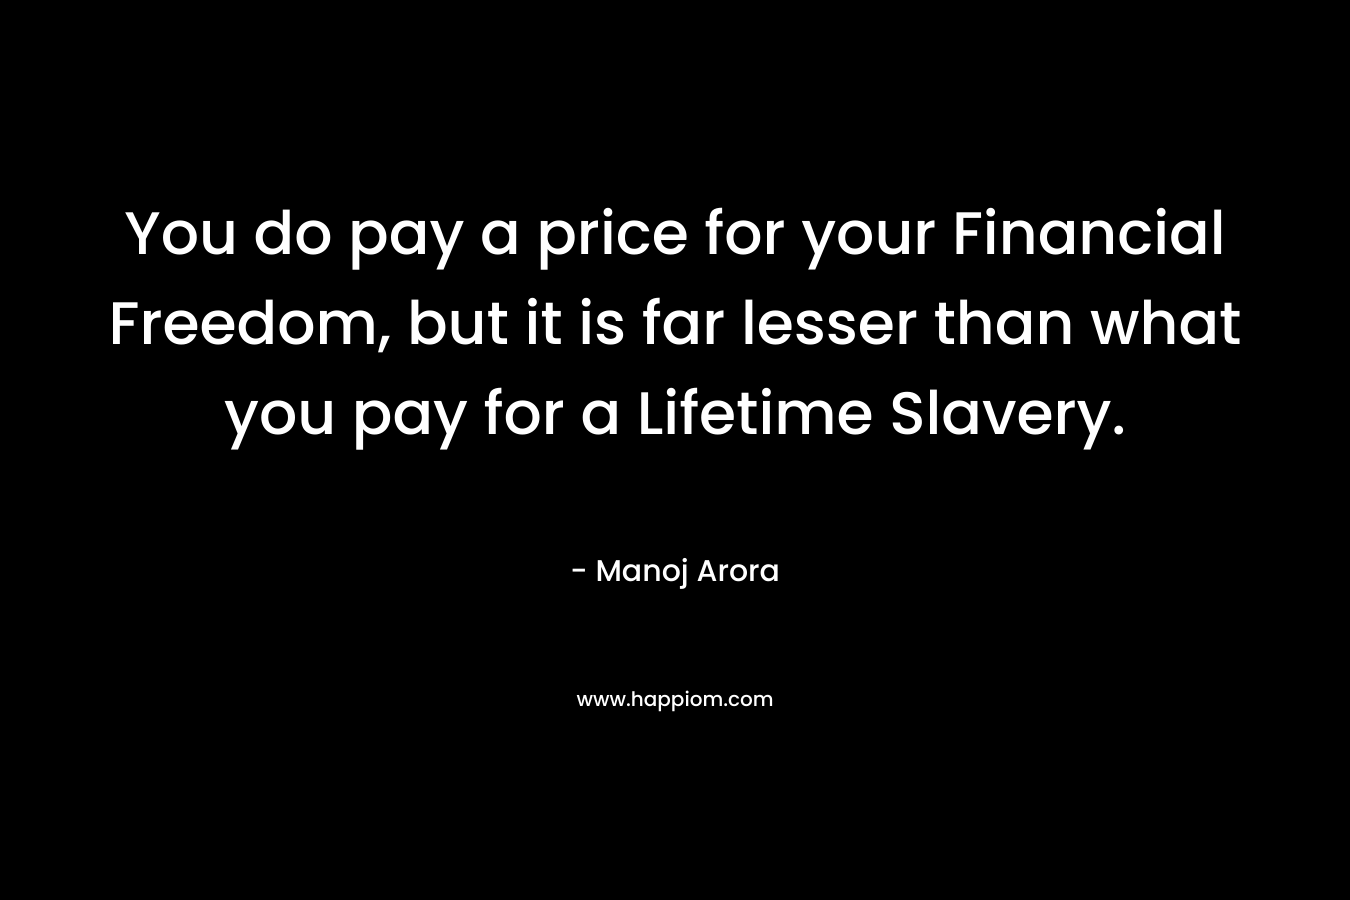 You do pay a price for your Financial Freedom, but it is far lesser than what you pay for a Lifetime Slavery.